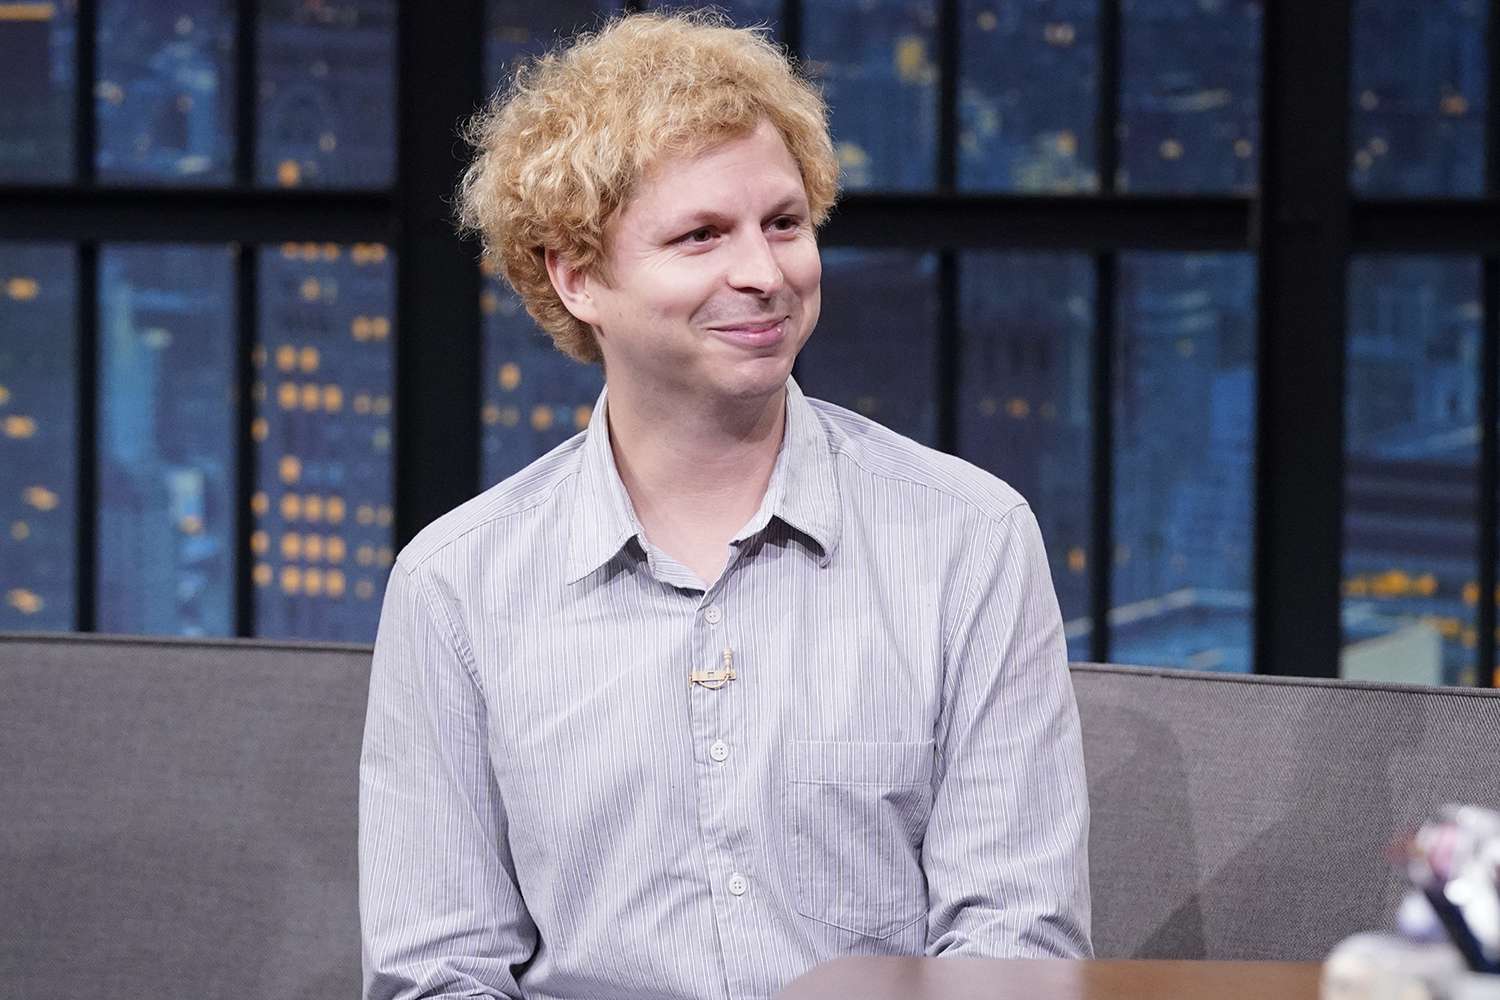 Michael Cera Jokes His Newly Blonde Hair Is in a 'Weird Place Right Now': 'Just Feels Wrong'